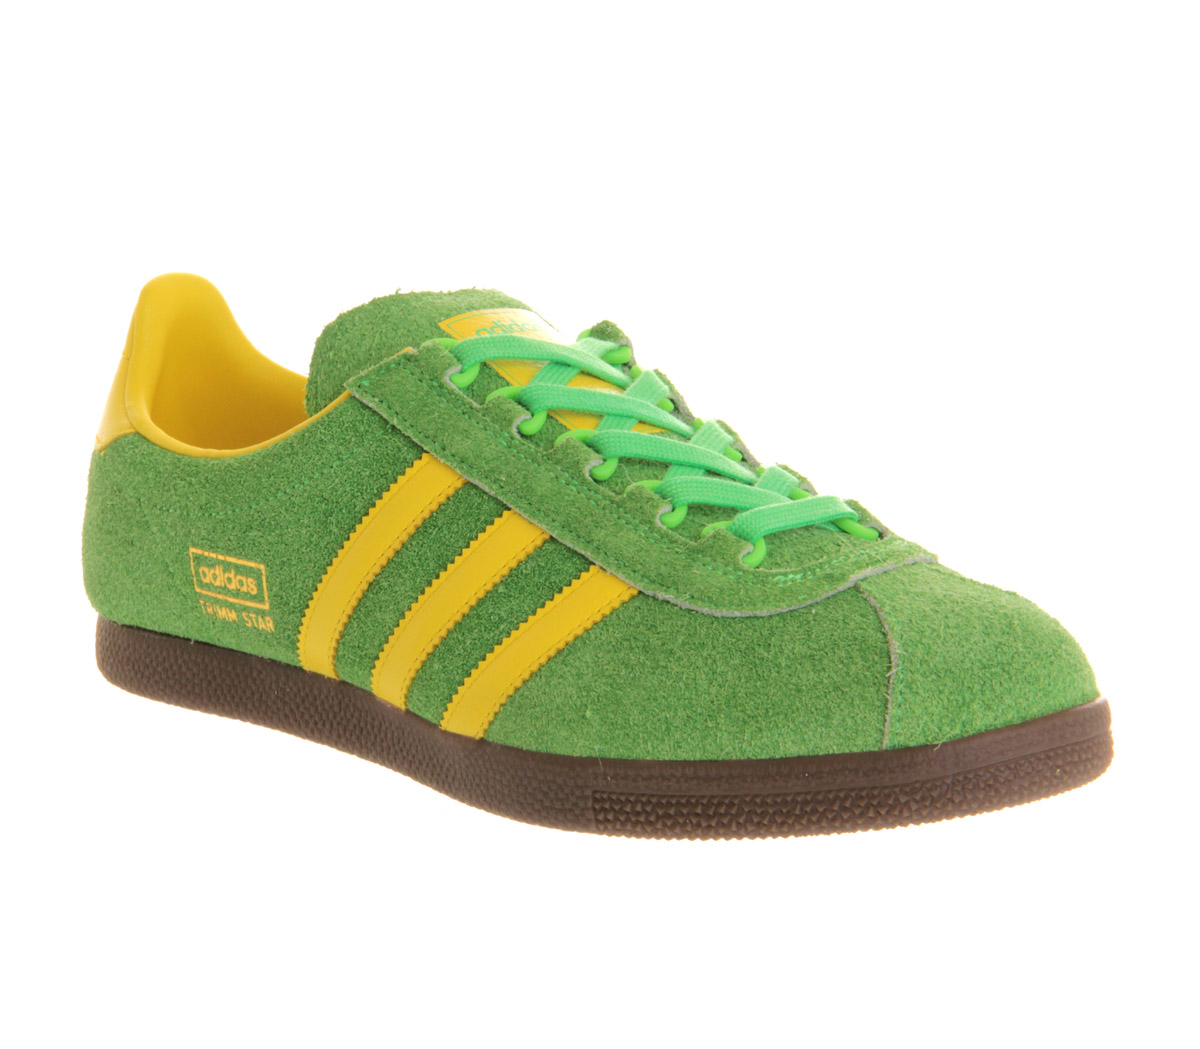 trimm star green and yellow